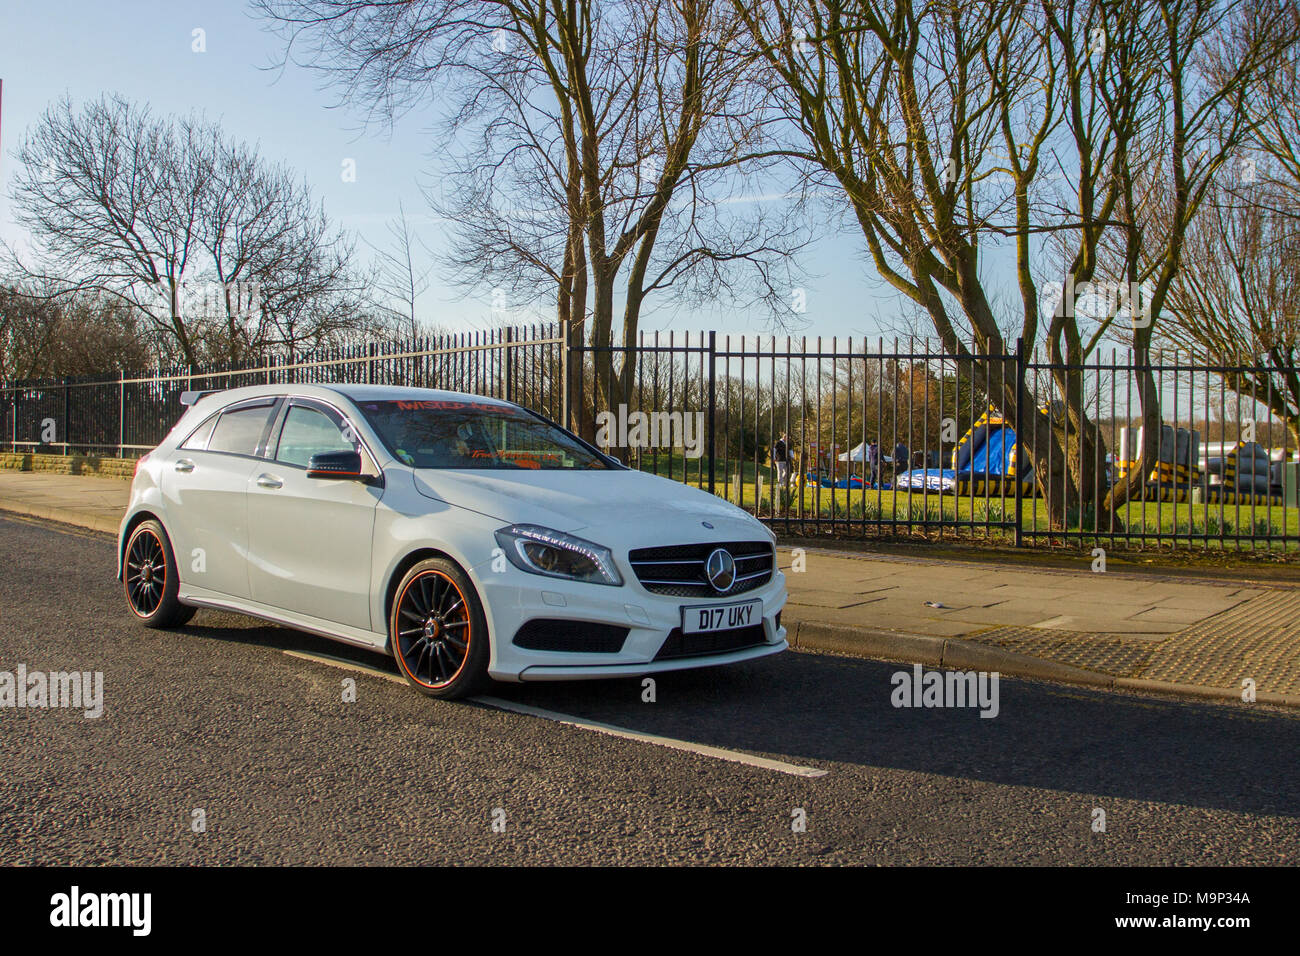 2017 white Mercedes Benz A200 AMG sport at the North-West Supercar event as cars and tourists arrive in the coastal resort.  SuperCars are bumper to bumper on the seafront esplanade as classic & sports car enthusiasts enjoy a motoring day out. Stock Photo